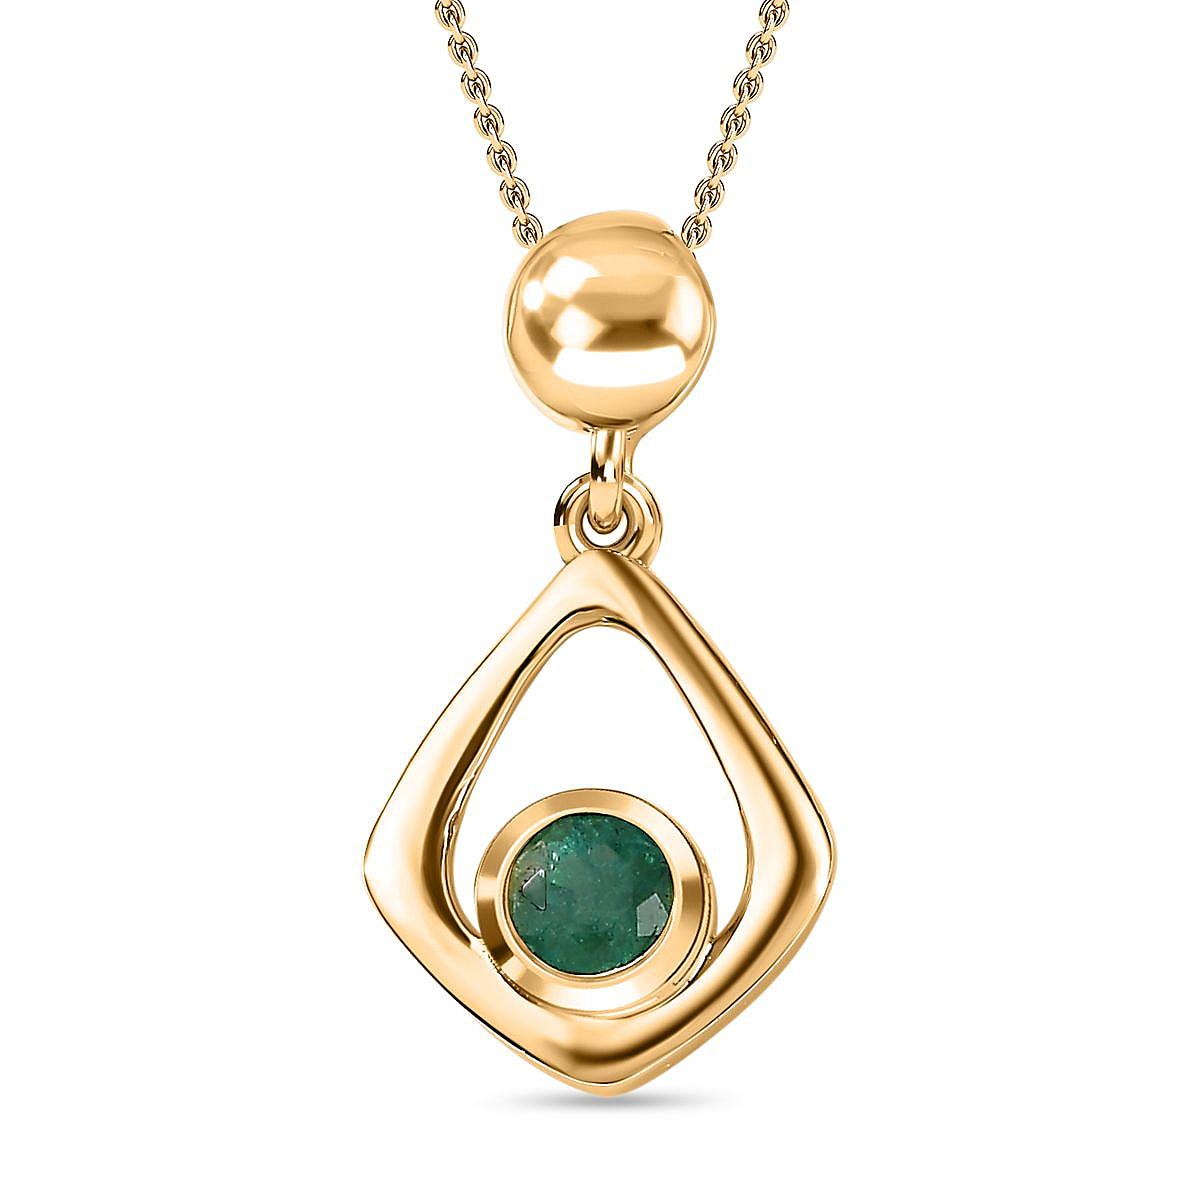 AAA Gemfields Emerald Pendant with Chain (Size 20) in 18K Vermeil YG Plated Sterling Silver, Silver Wt. 5.62 Gms